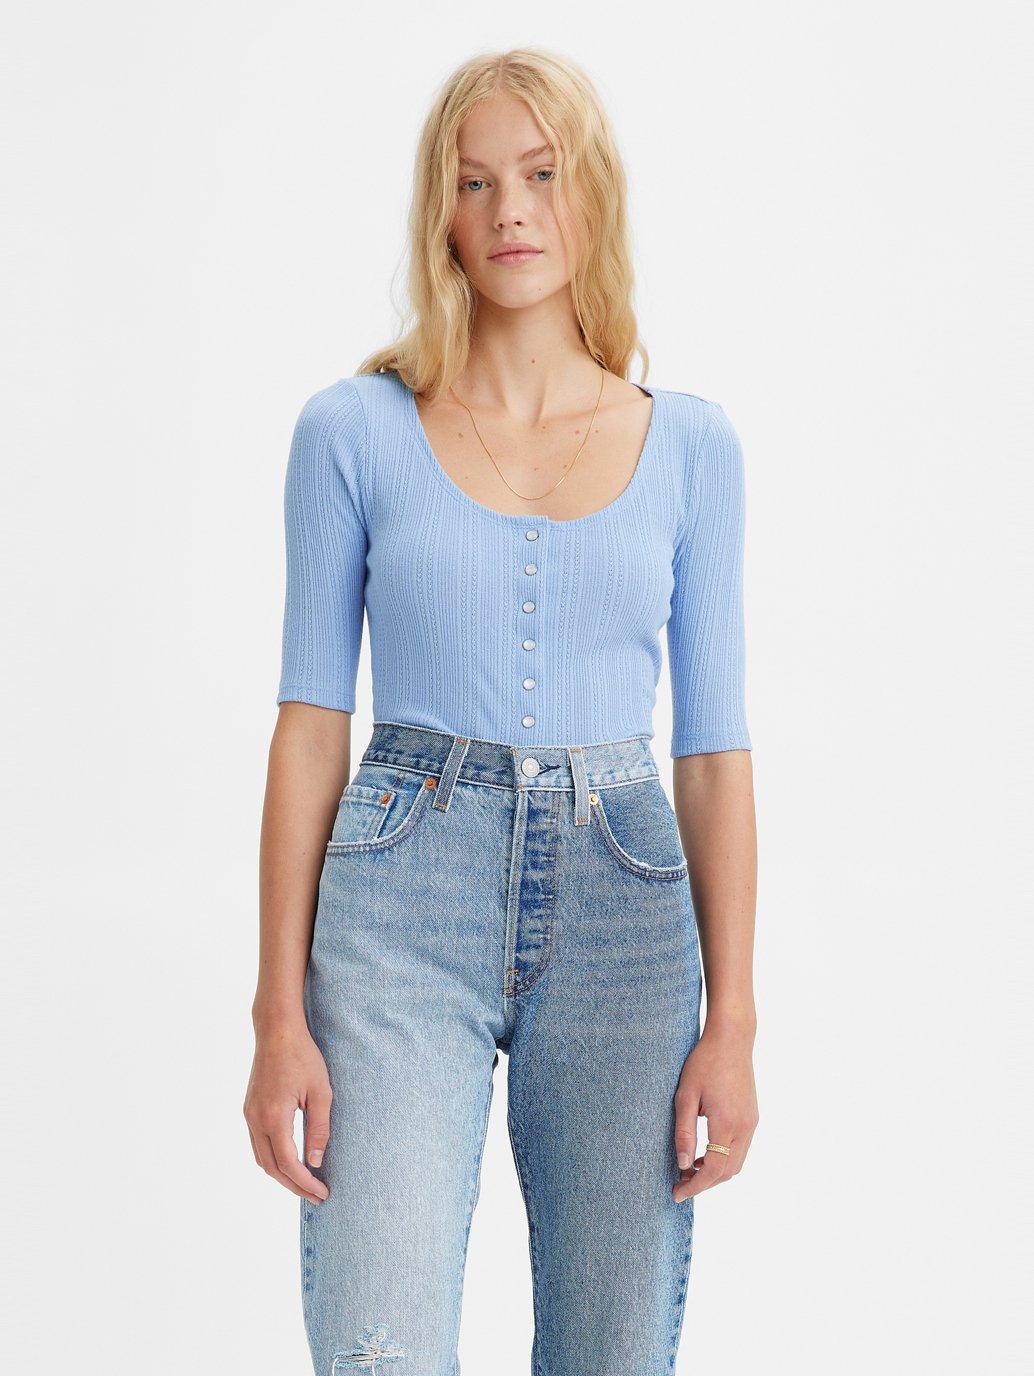 Buy Levi's® Women's Dry Goods Pointelle Top | Levi's® Official Online Store  MY